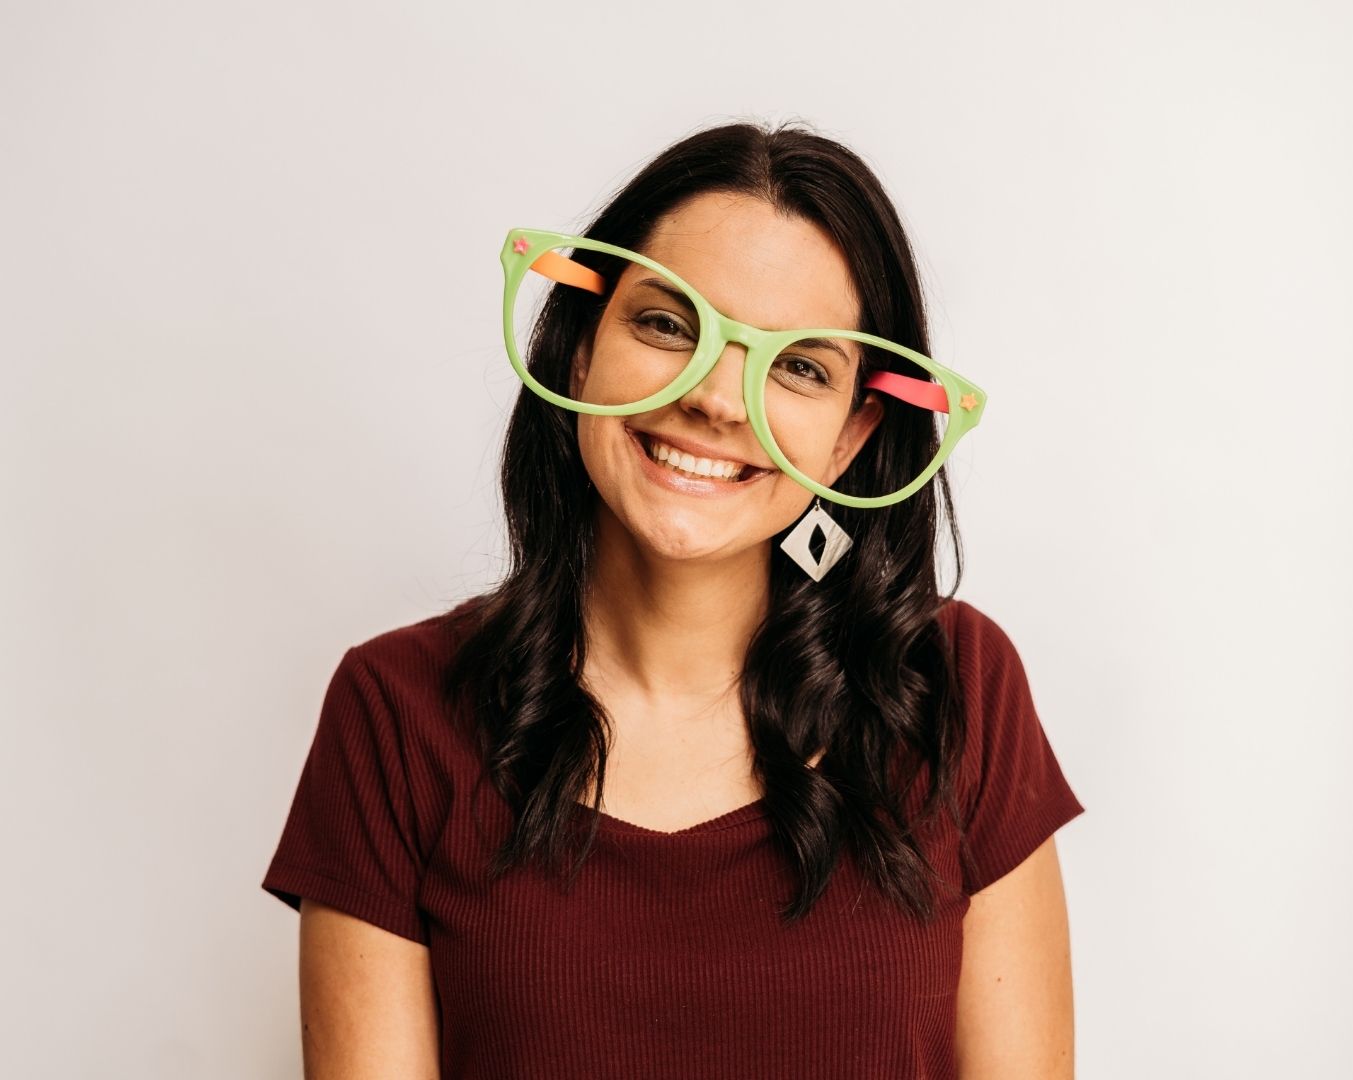 Young woman with oversized glasses on